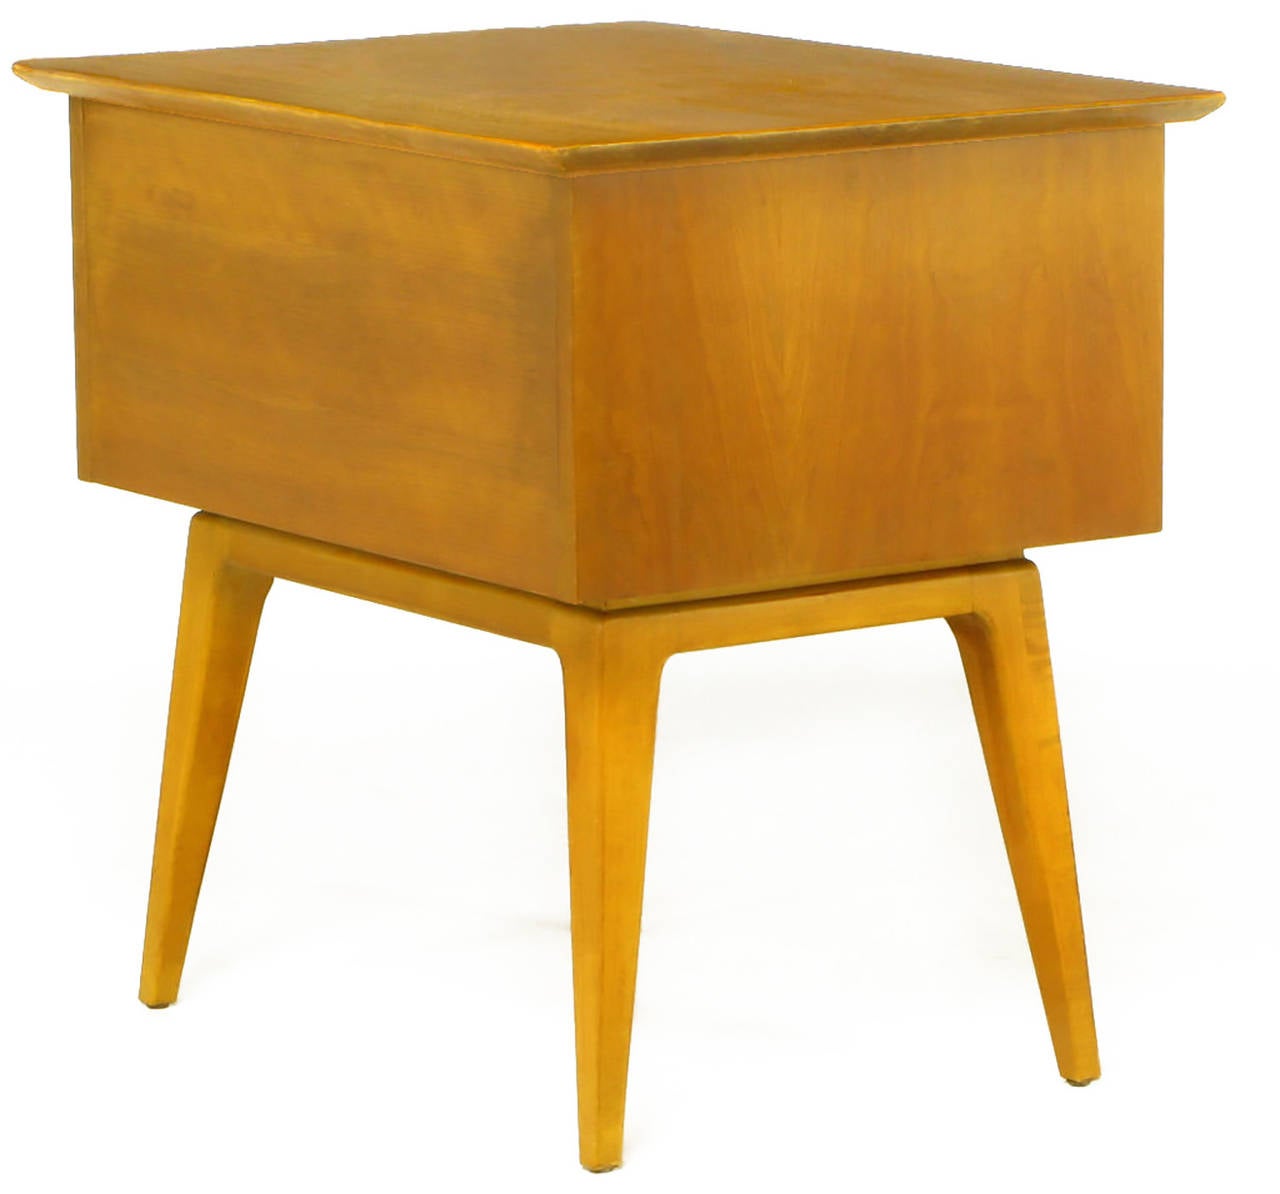 Mid-20th Century Pair of Renzo Rutili Two-Drawer Nightstands in Bleached Walnut